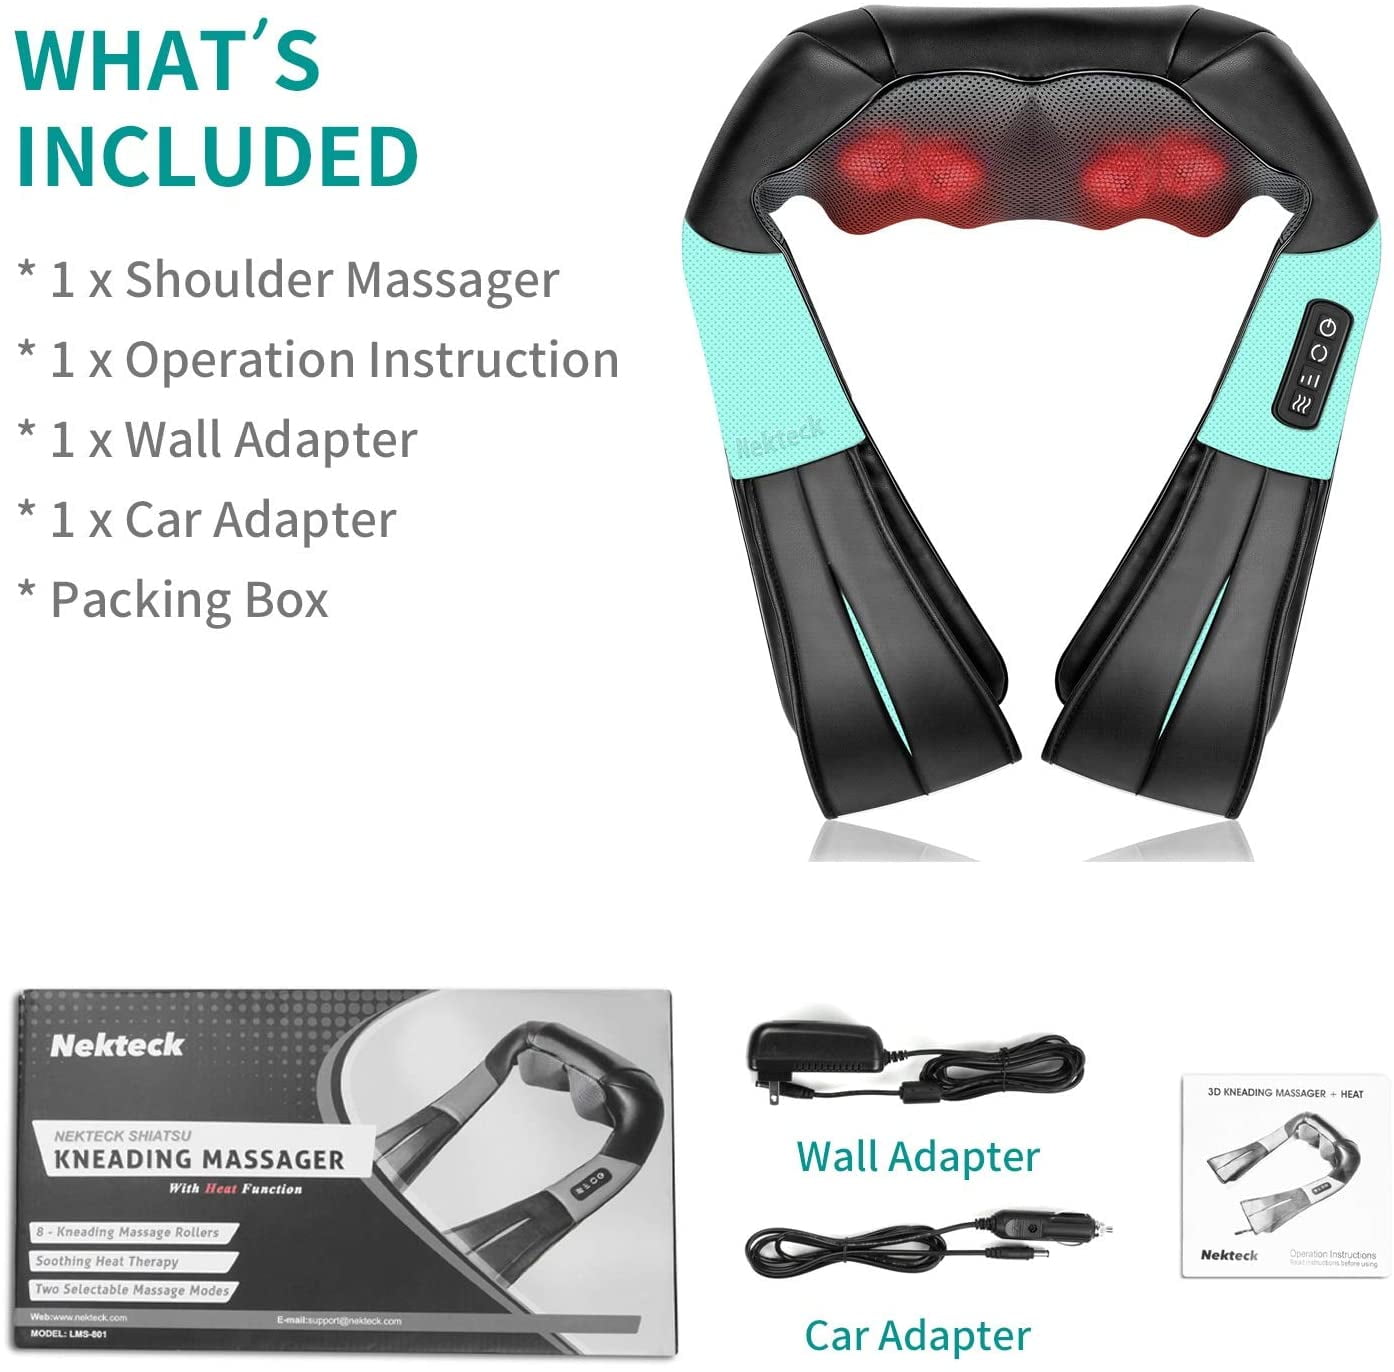 Nekteck Shiatsu Back and Neck Massager with Adjustable Heat and Strap, Deep  Tissue Kneading Electric…See more Nekteck Shiatsu Back and Neck Massager